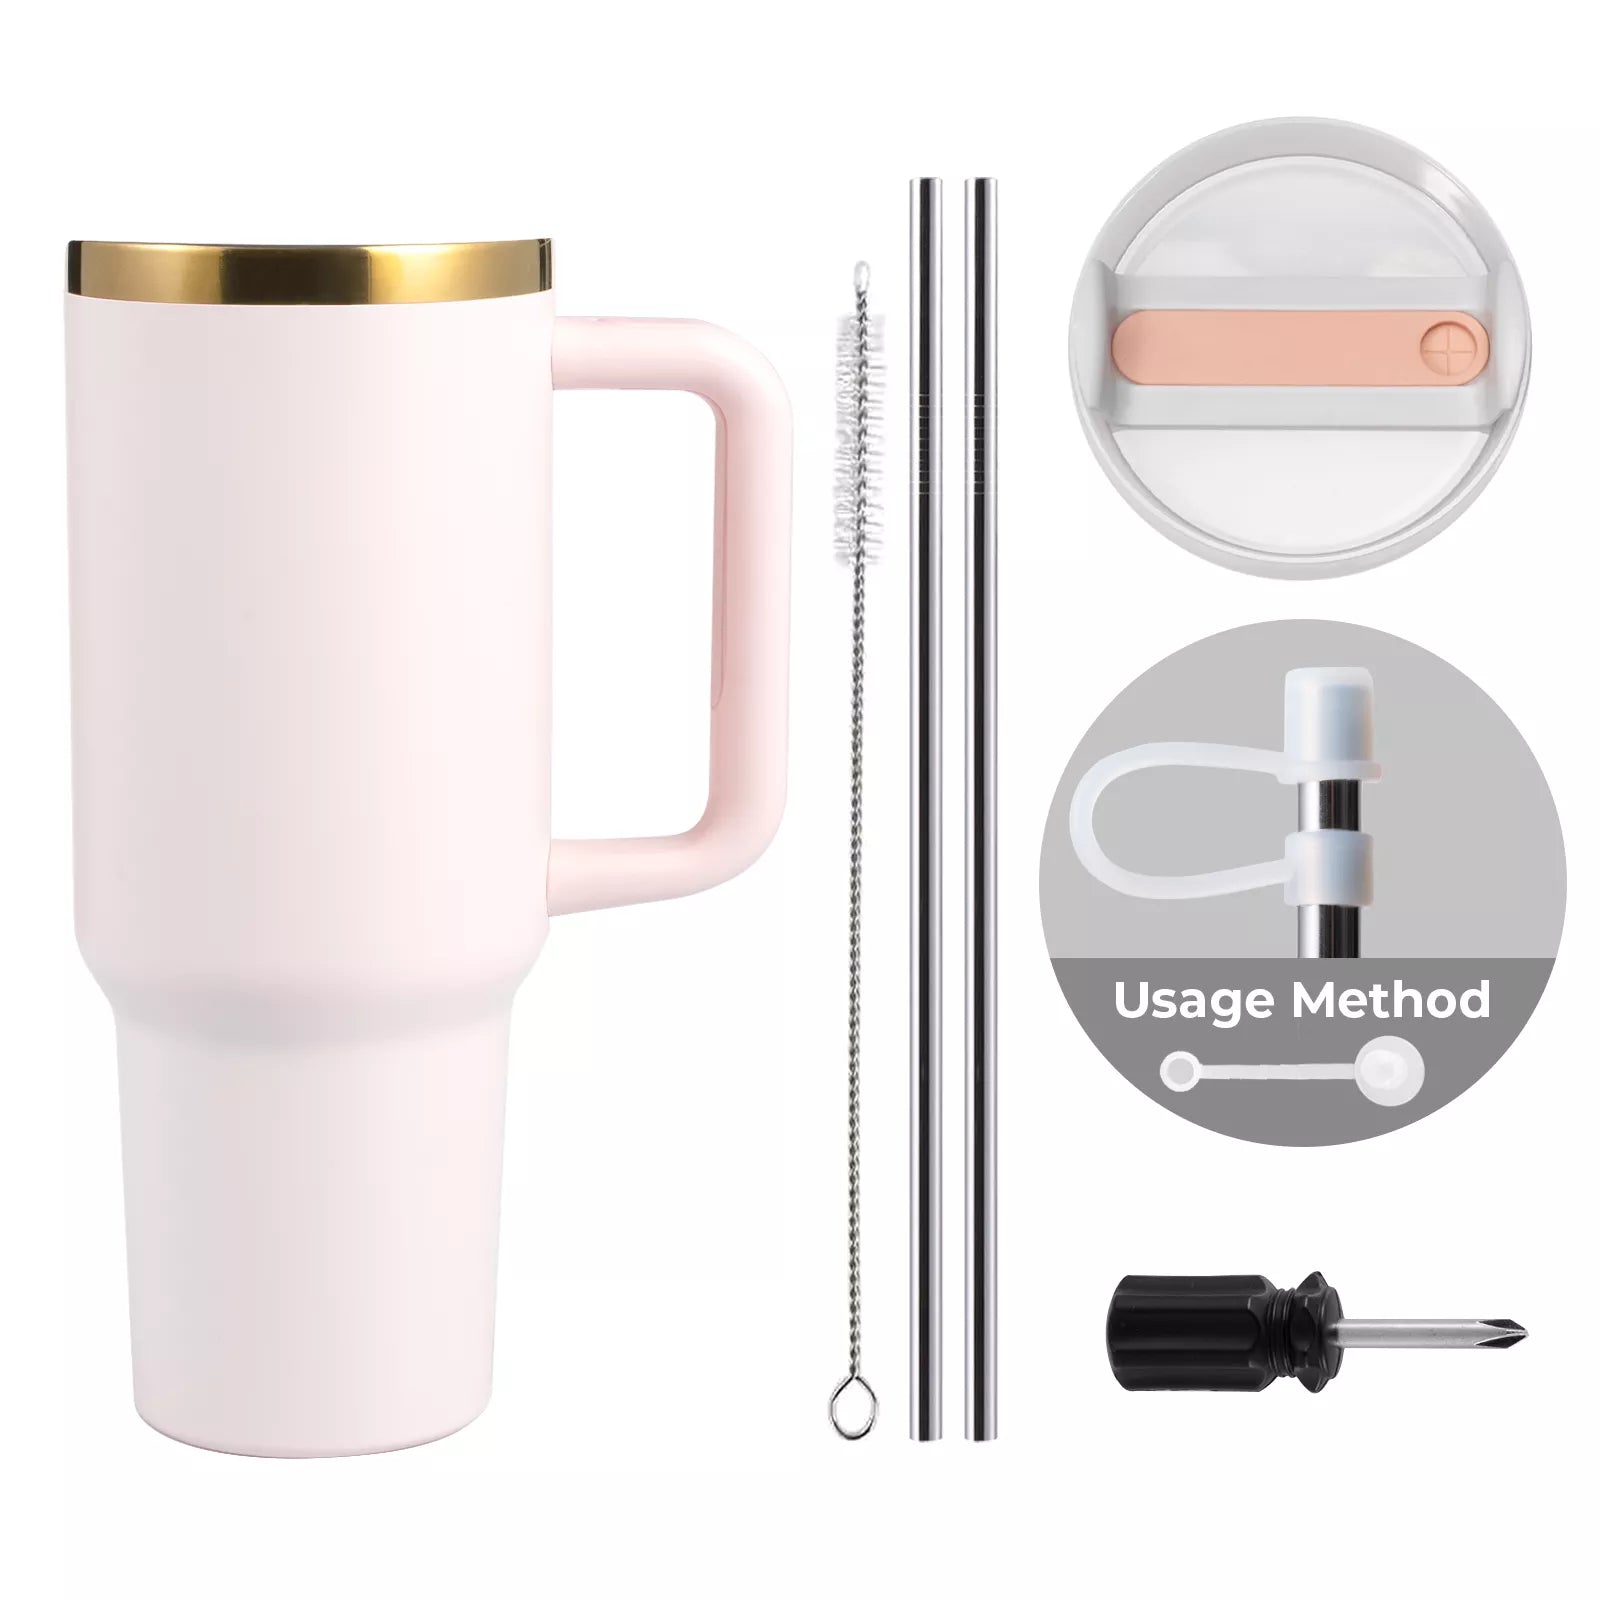 Pink to Gold Stainless Steel Tumbler with Handle (40oz)